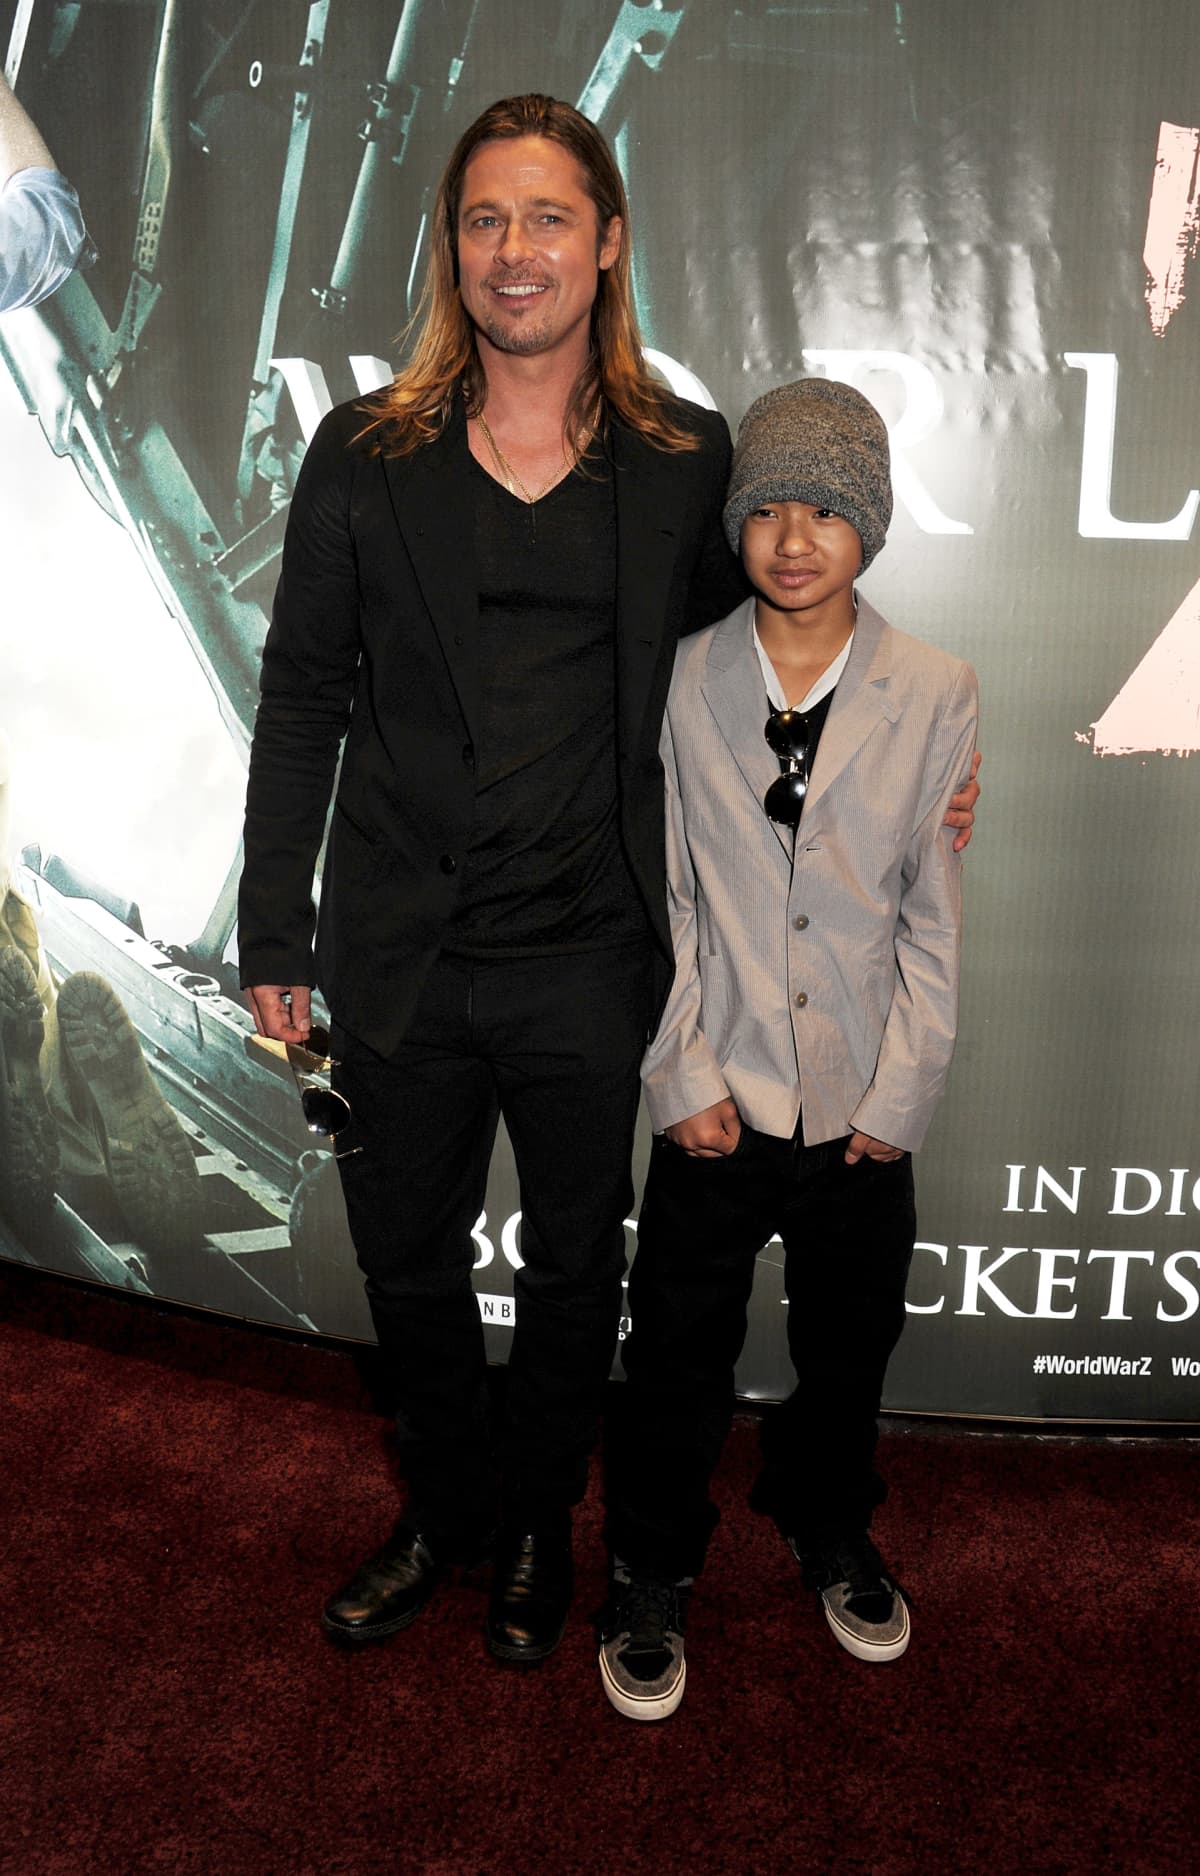 Brad Pitt at a movie premiere poses with his arm around his son, Maddox